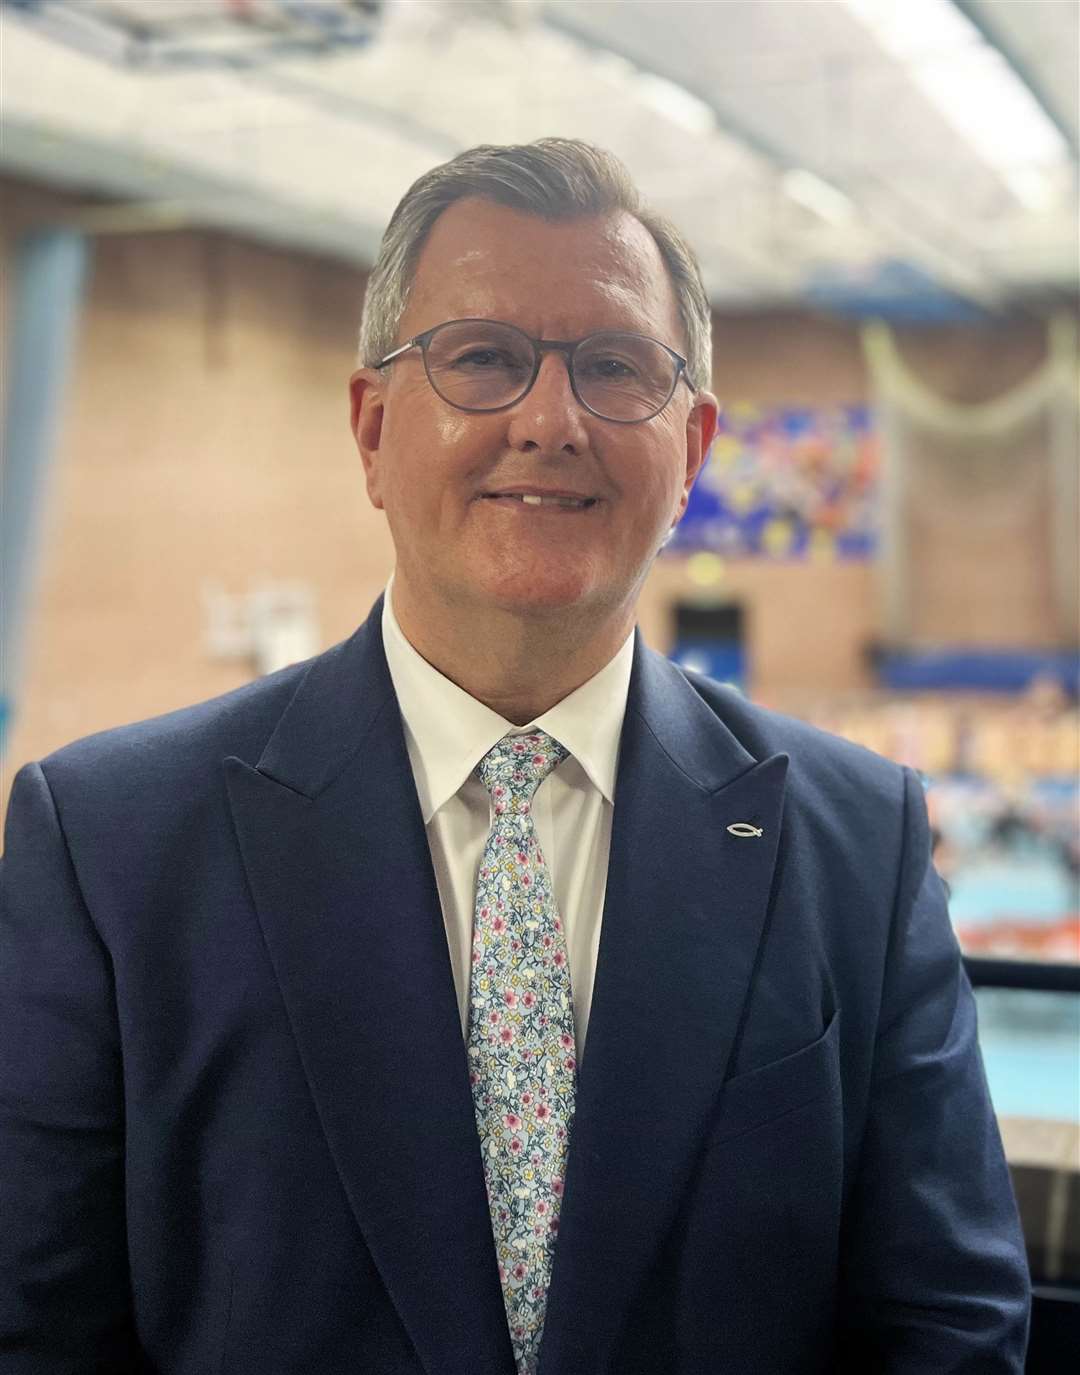 DUP leader Sir Jeffrey Donaldson at Laganvalley Leisureplex where counting is continuing for the Lisburn and Castlereagh City Council (Claudia Savage/PA)